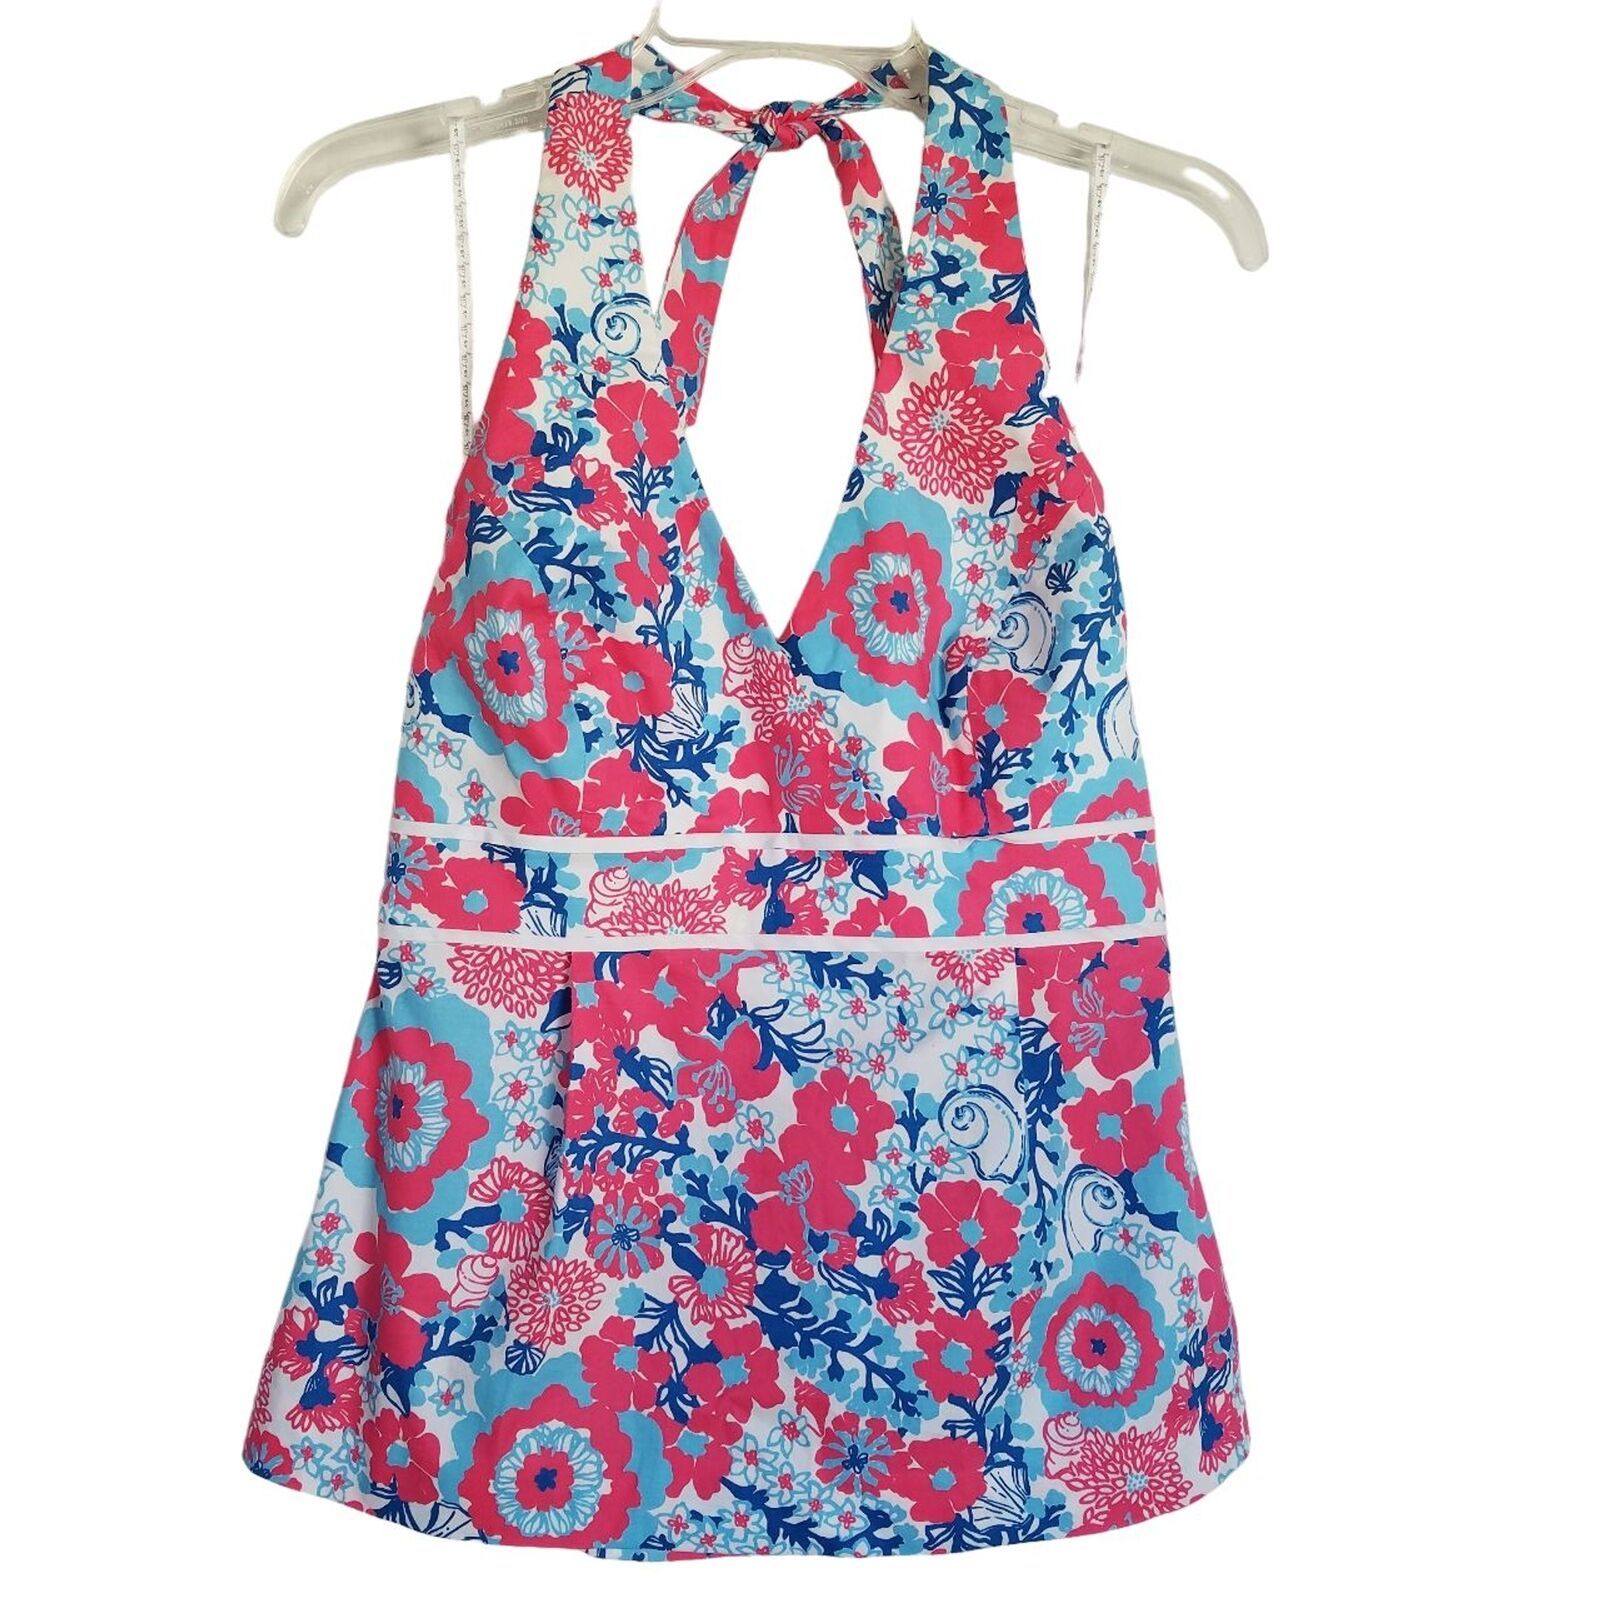 Primary image for Lilly Pulitzer Willa Halter Top Size 6 Shell Yeah Pink Blue Floral New $138